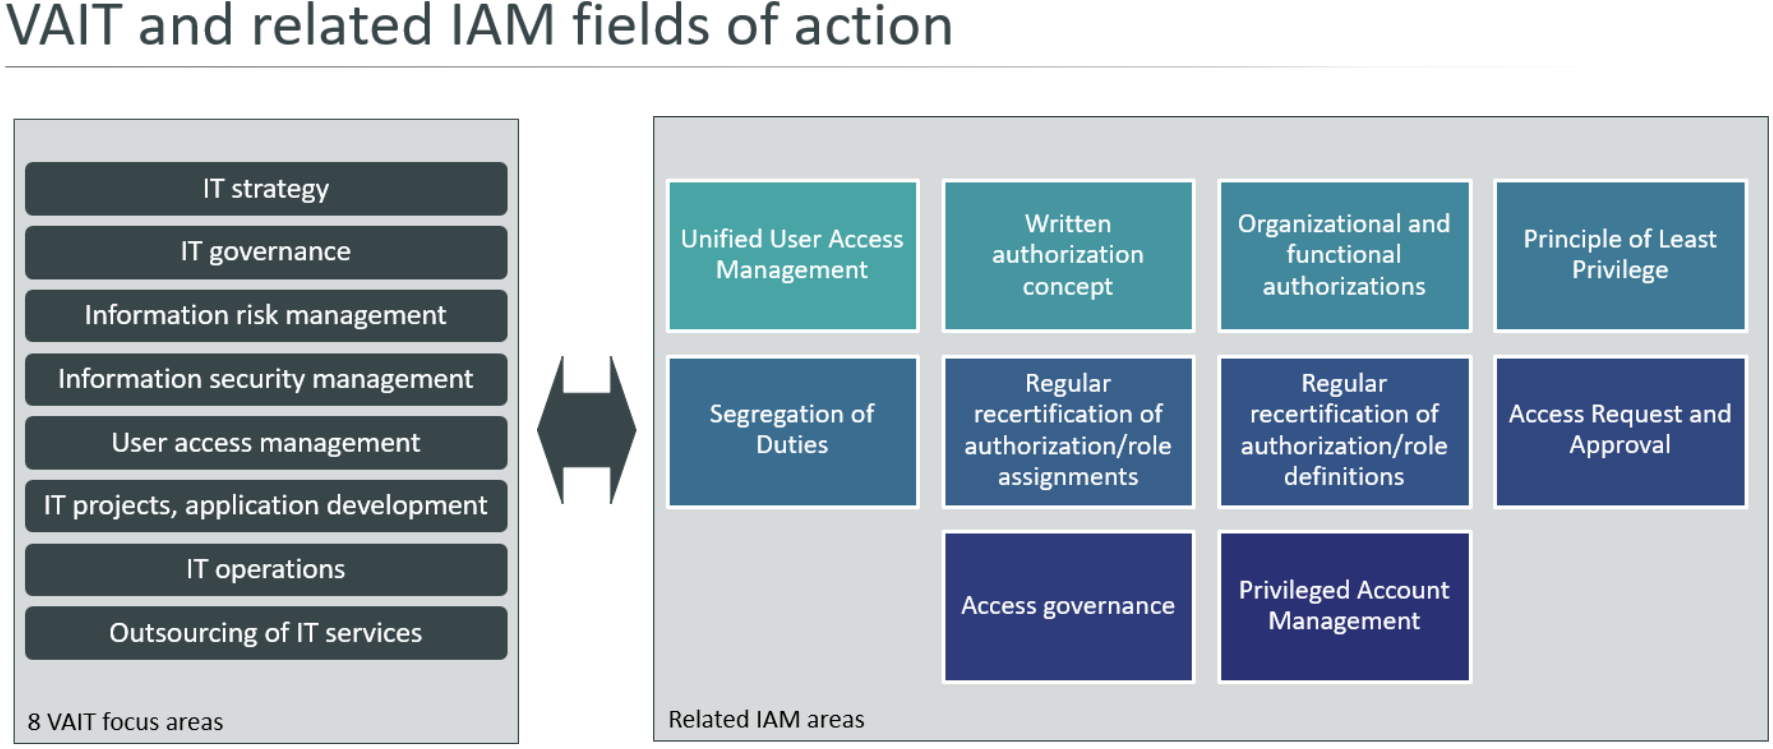  Figure 1: VAIT and related IAM/IAG fields of action 